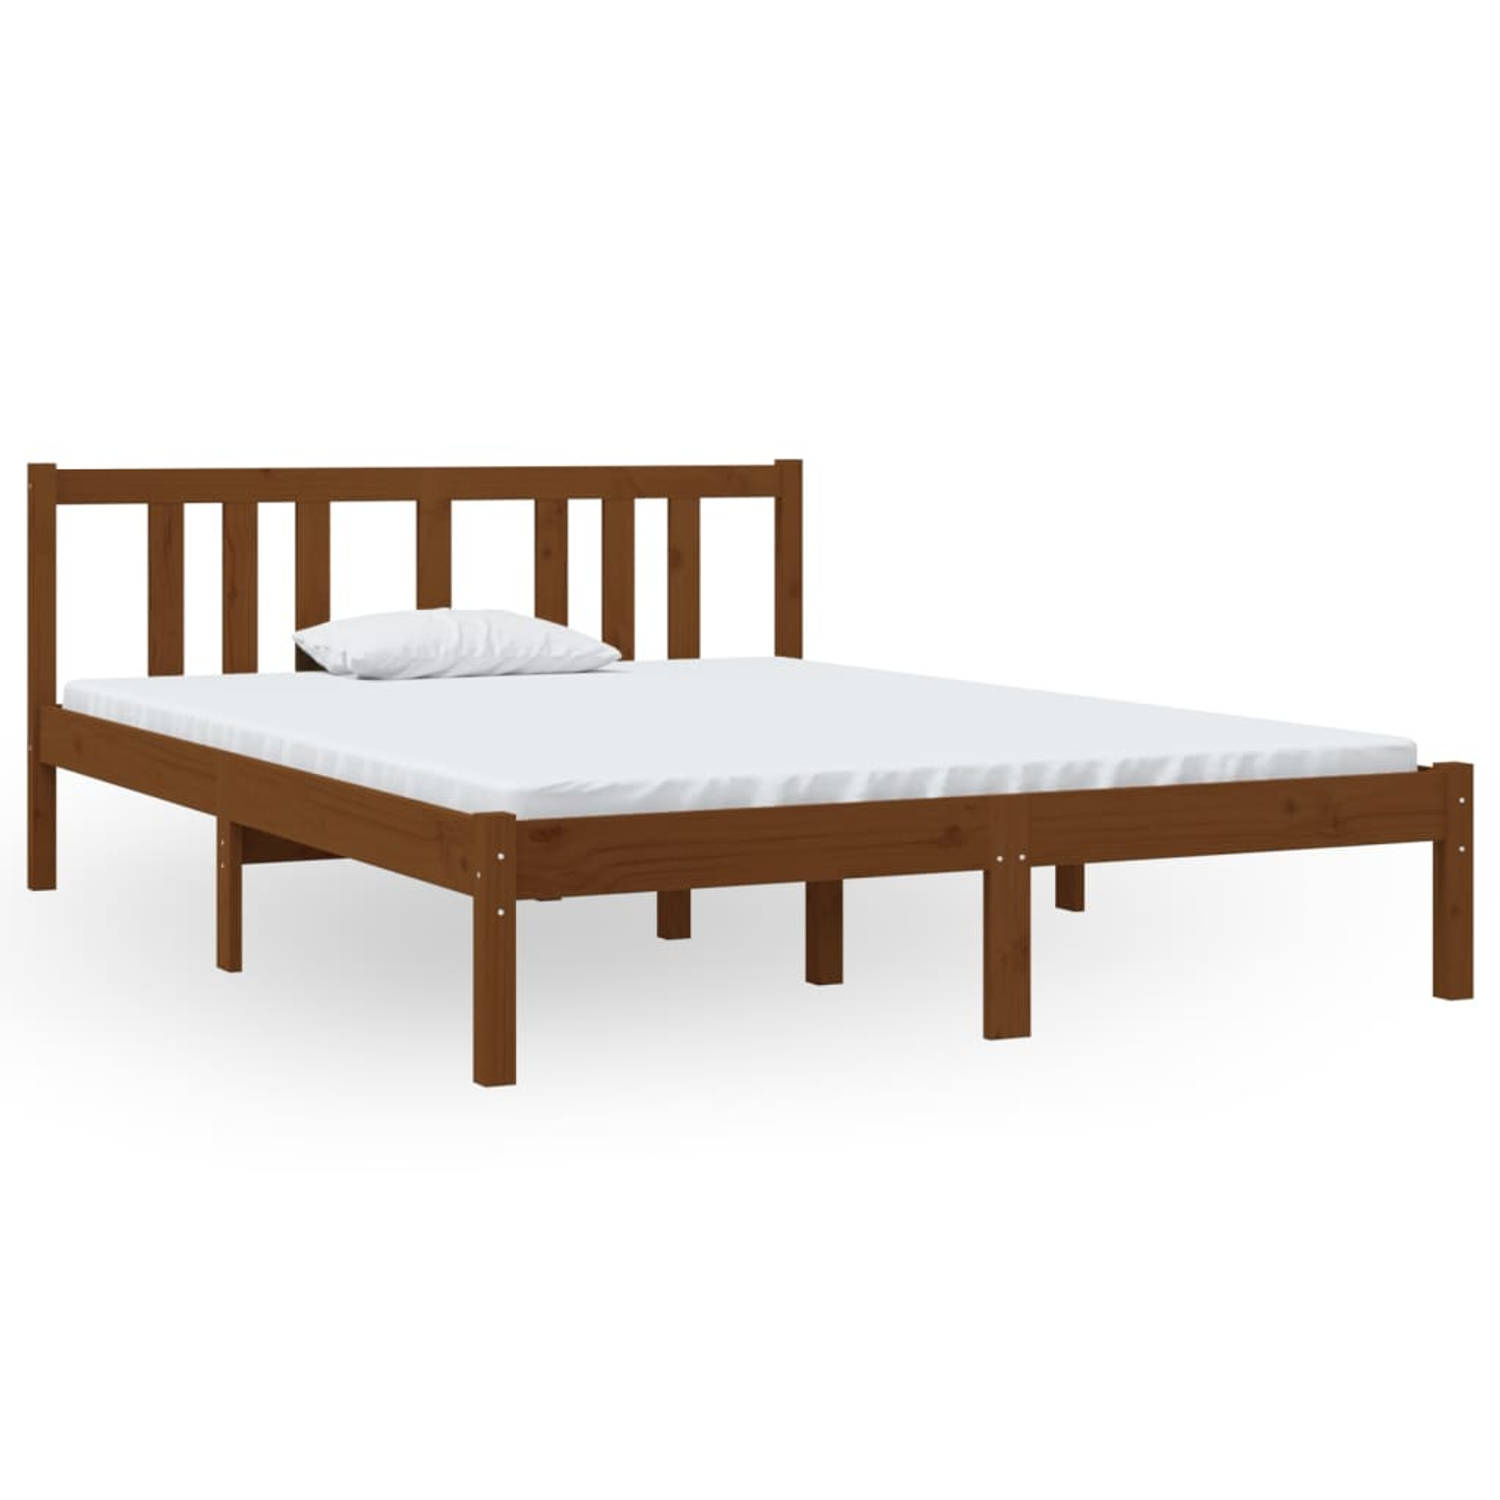 The Living Store Bedframe massief hout honingbruin 135x190 cm 4FT6 Double - Bed